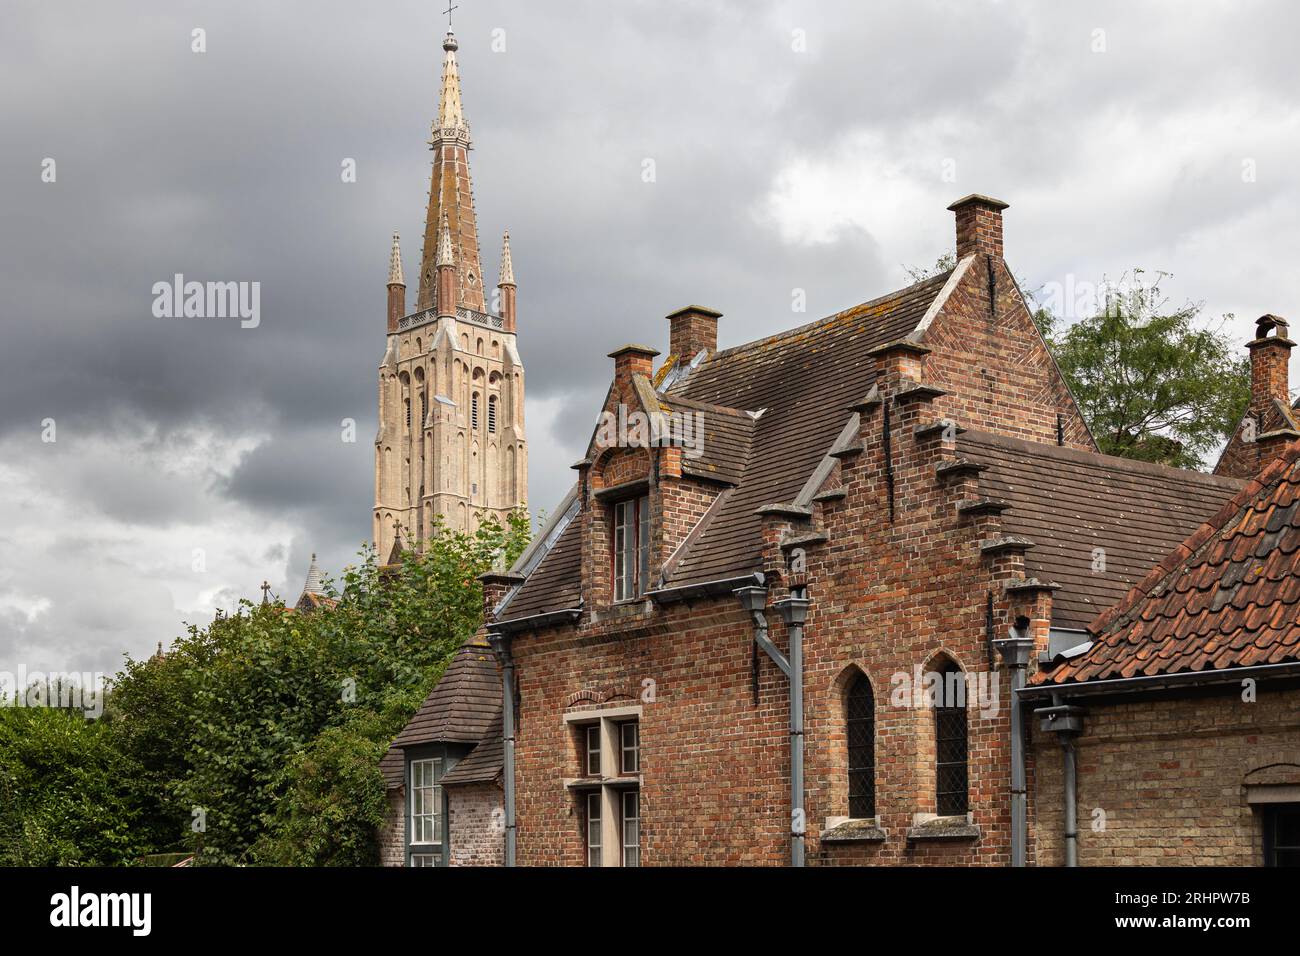 Spire of the church of our lady in Bruge, Belgium Stock Photo